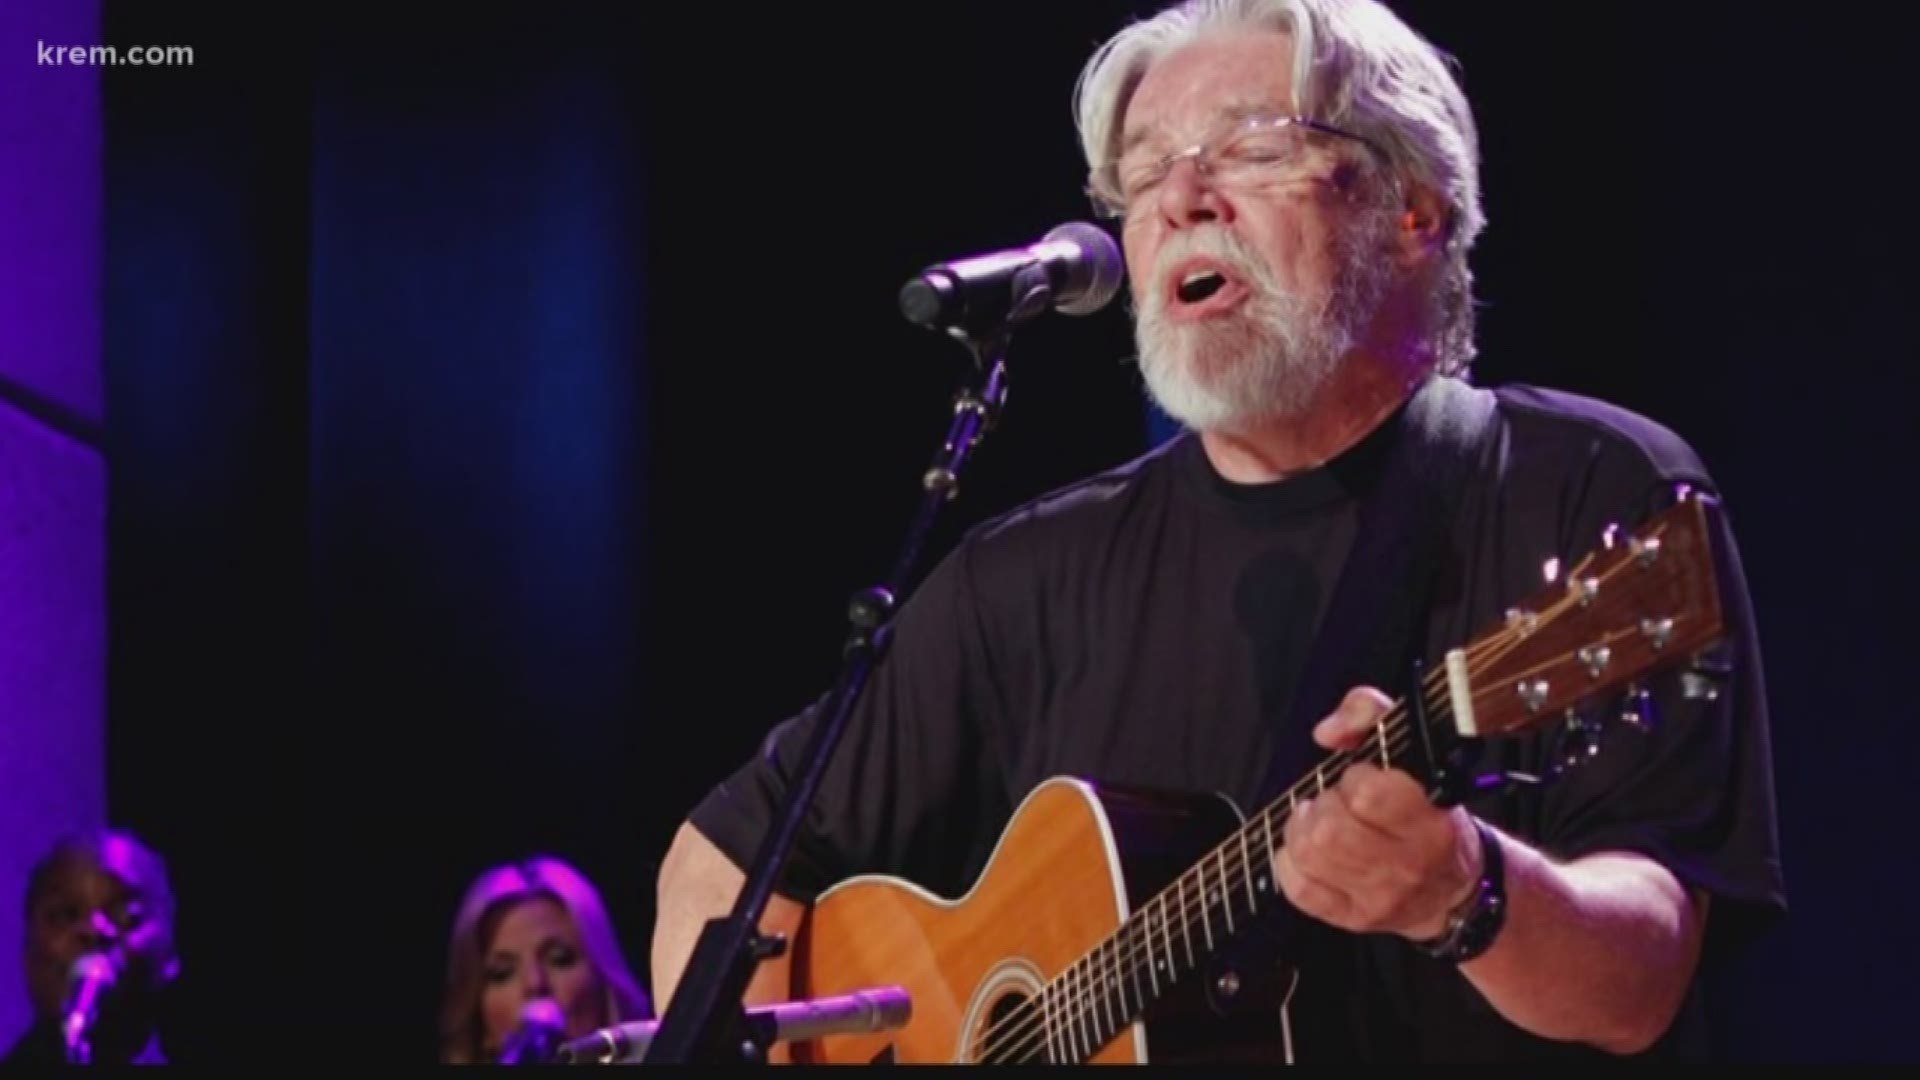 Bob Seger & The Silver Bullet Band will play at the Spokane Arena on Thursday, Sept. 19.